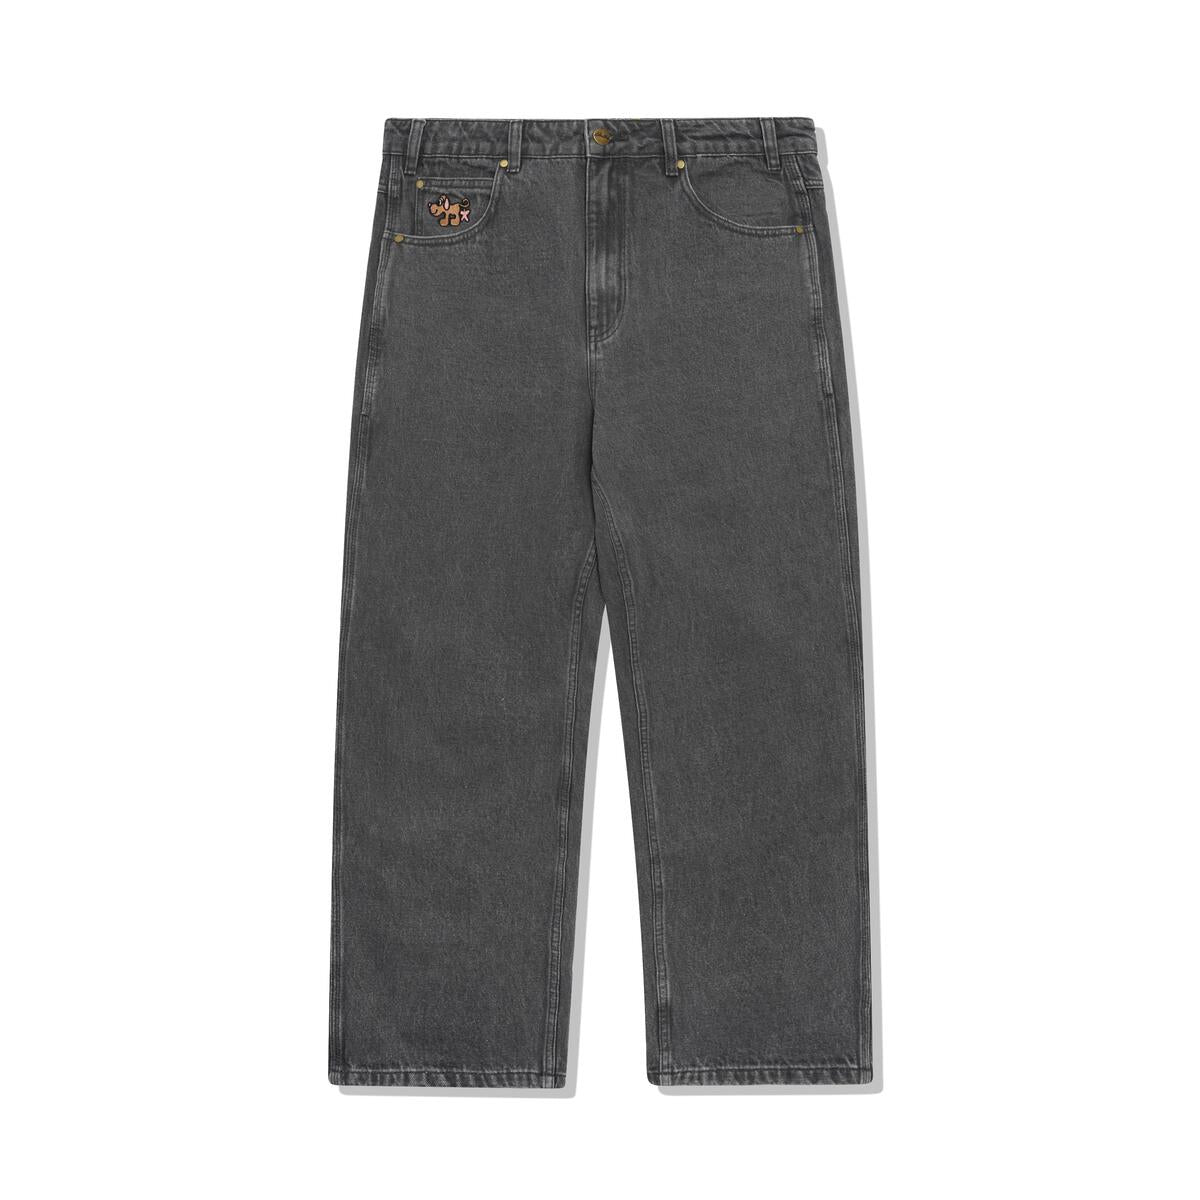 Pooch Relaxed Denim Jeans - Washed Grey